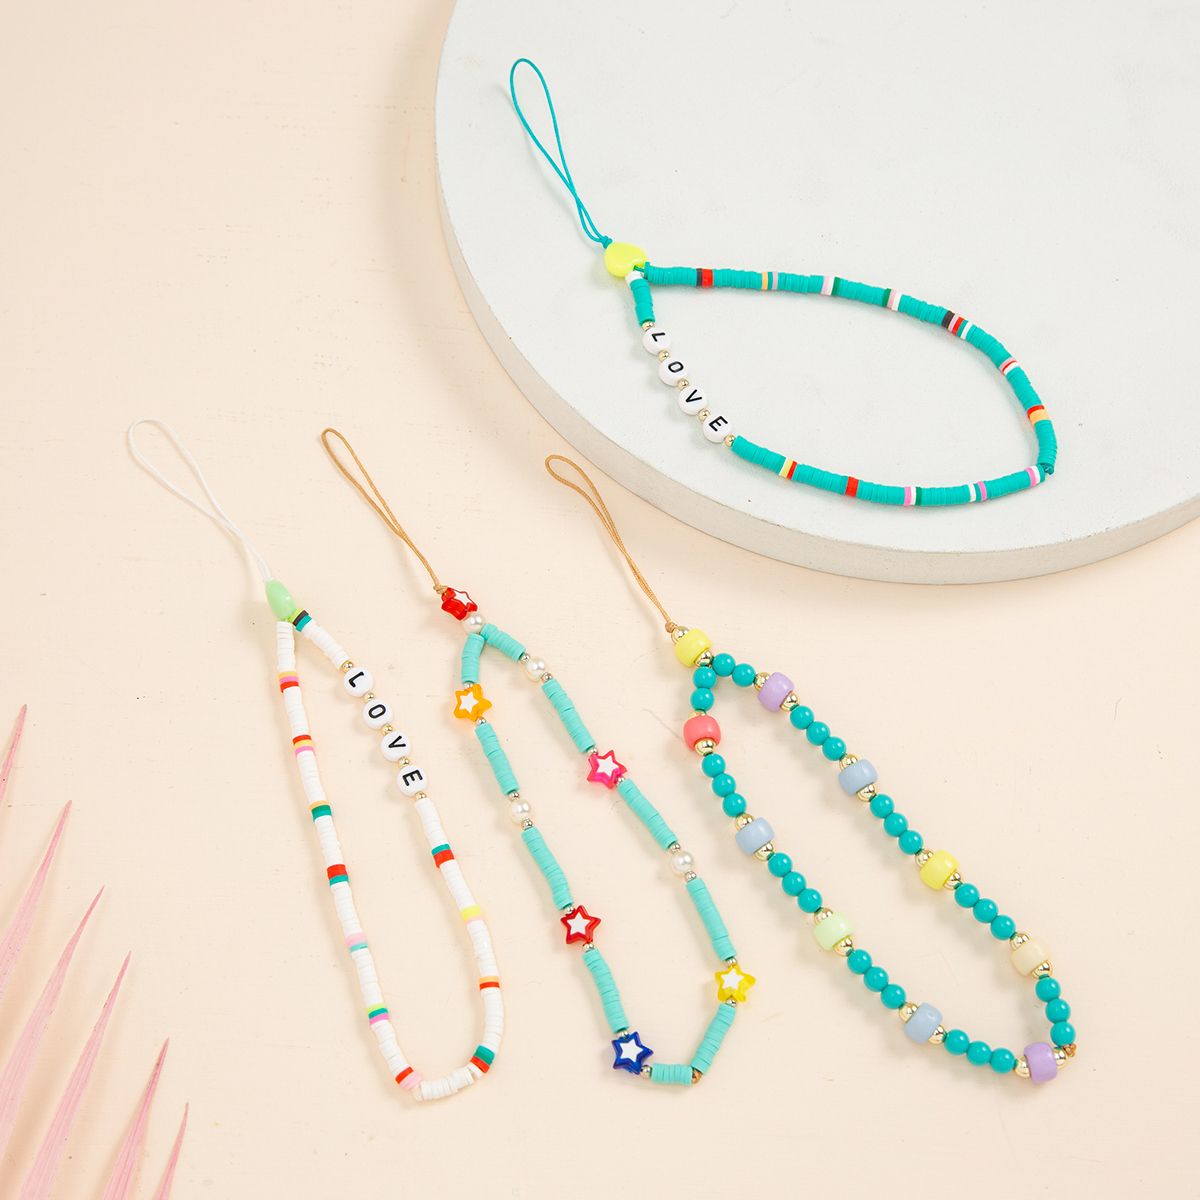 QIZI9595 New Acrylic Bead Women Colorful Cell Phone Case Hanging Cord Soft Pottery Rope Mobile Phone Strap Lanyard Phone Chain